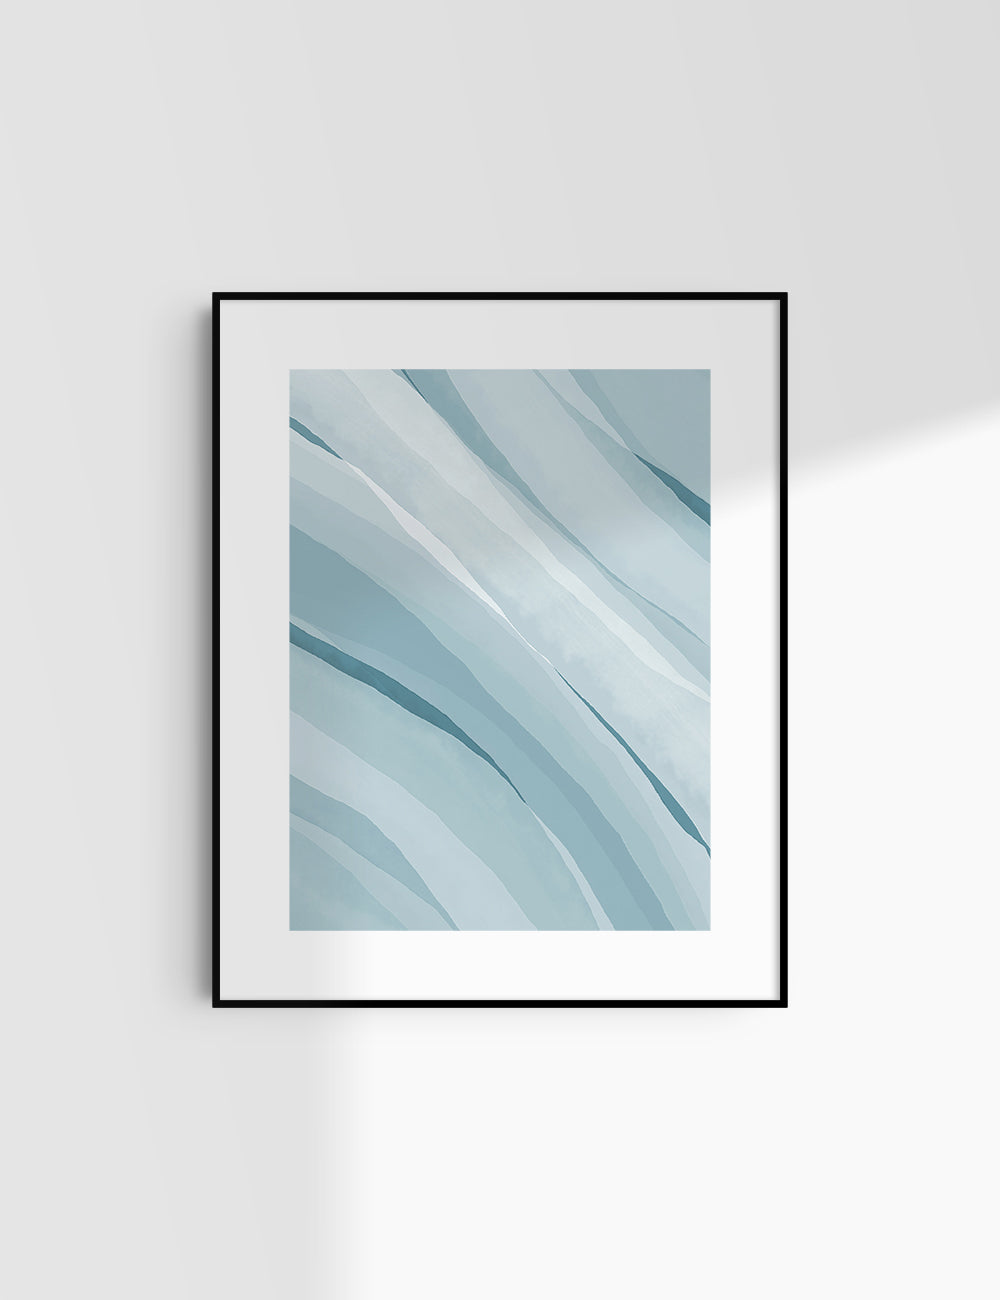 LIGHT BLUE WATERCOLOR ABSTRACT. Aesthetic. Minimalist. Abstract Watercolor Painting. Printable Wall Art. - PAPER MOON Art & Design